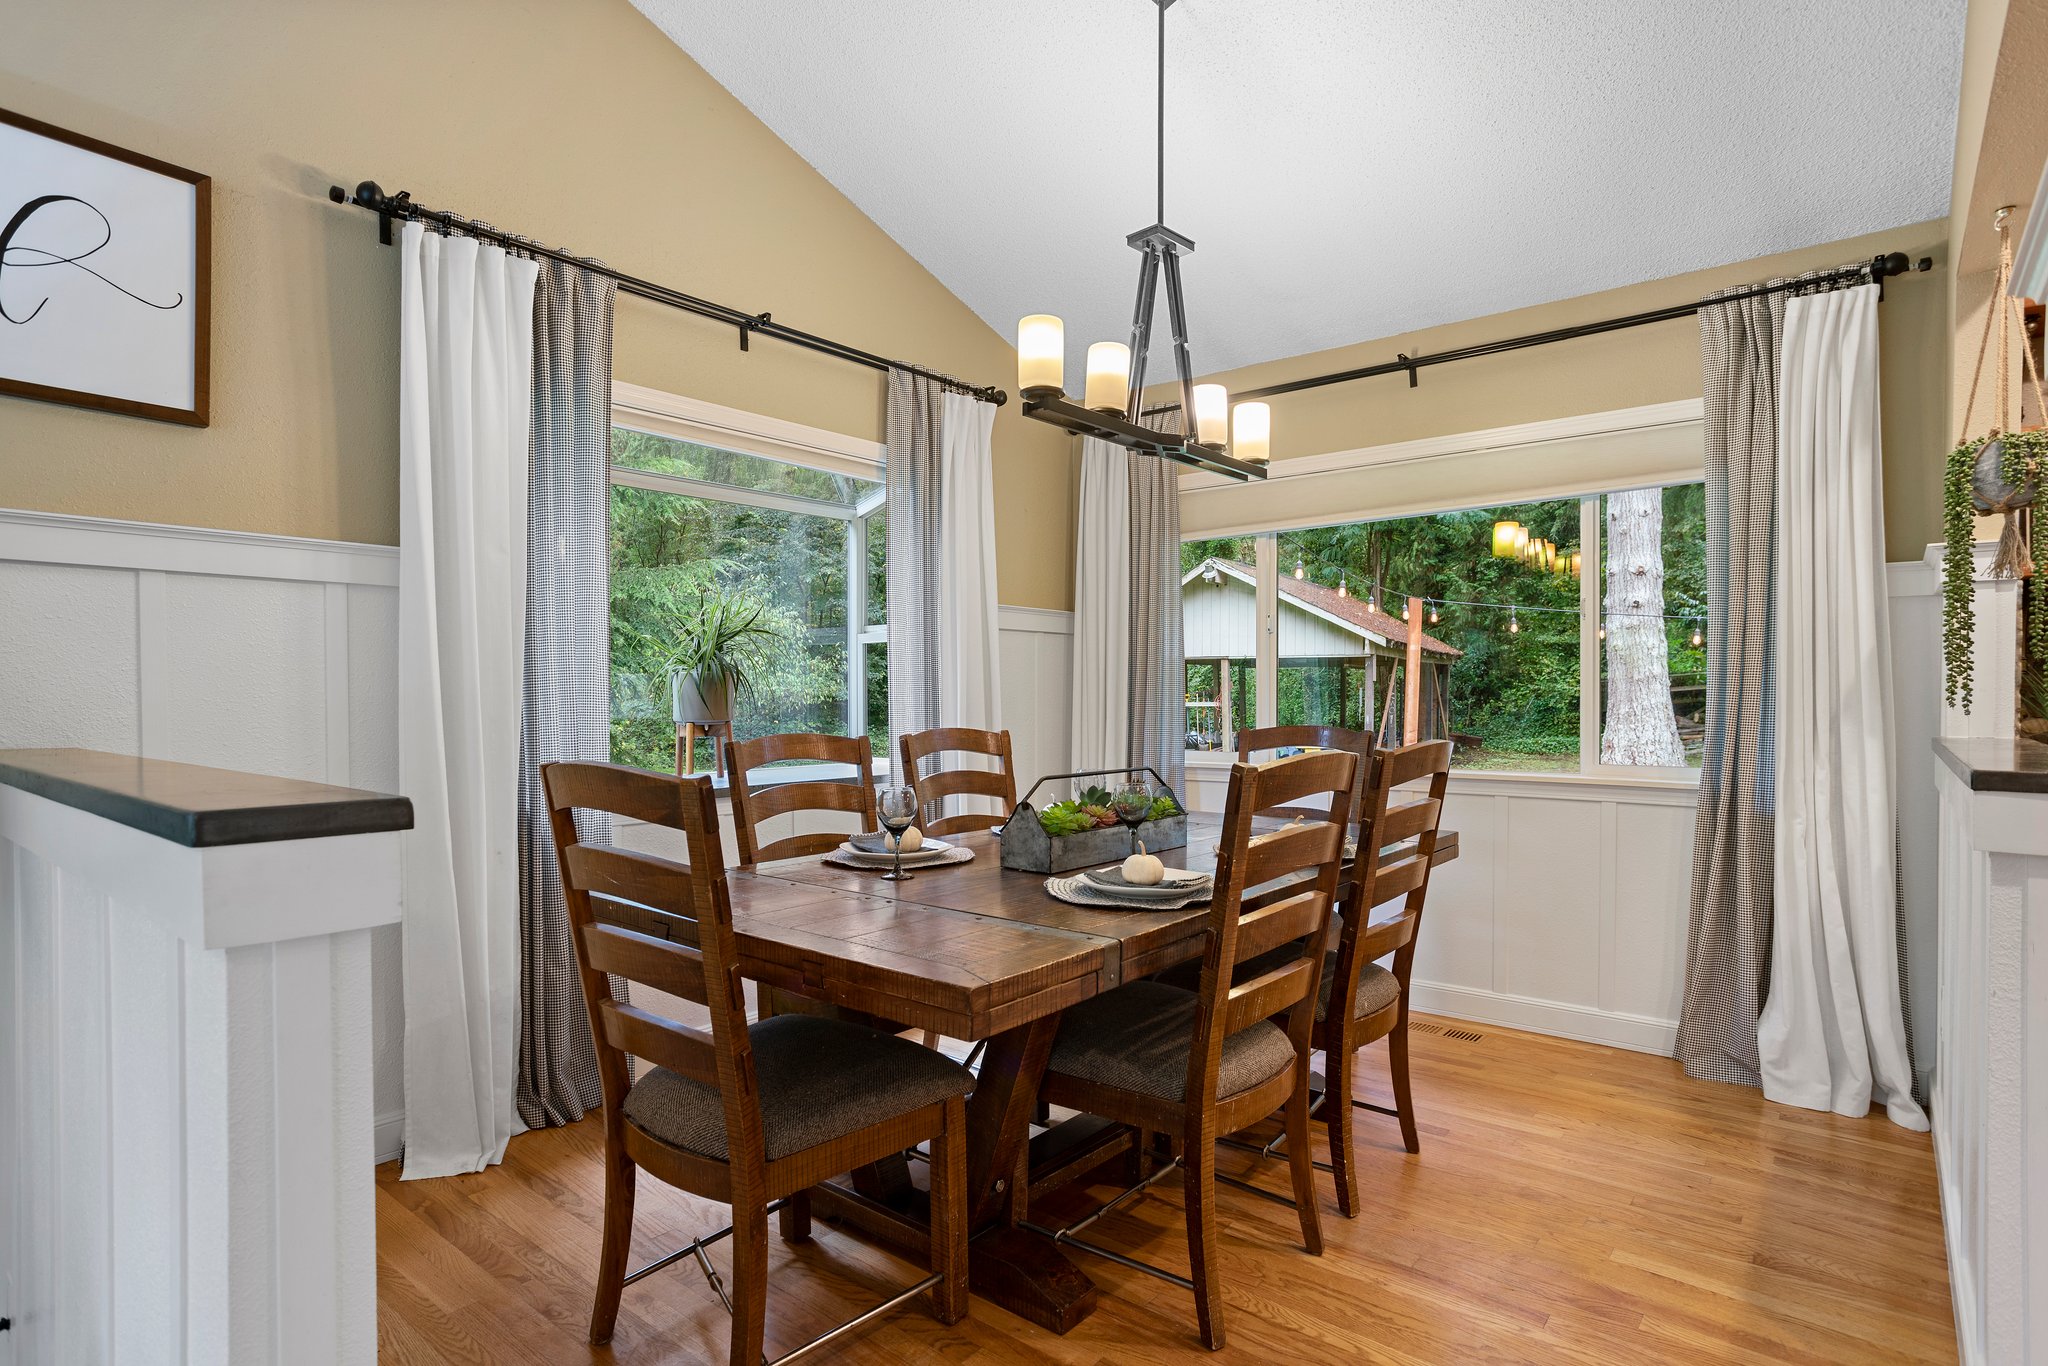 Custom Board & Batten style walls throughout home and attention to detail in your gorgeous dining room!